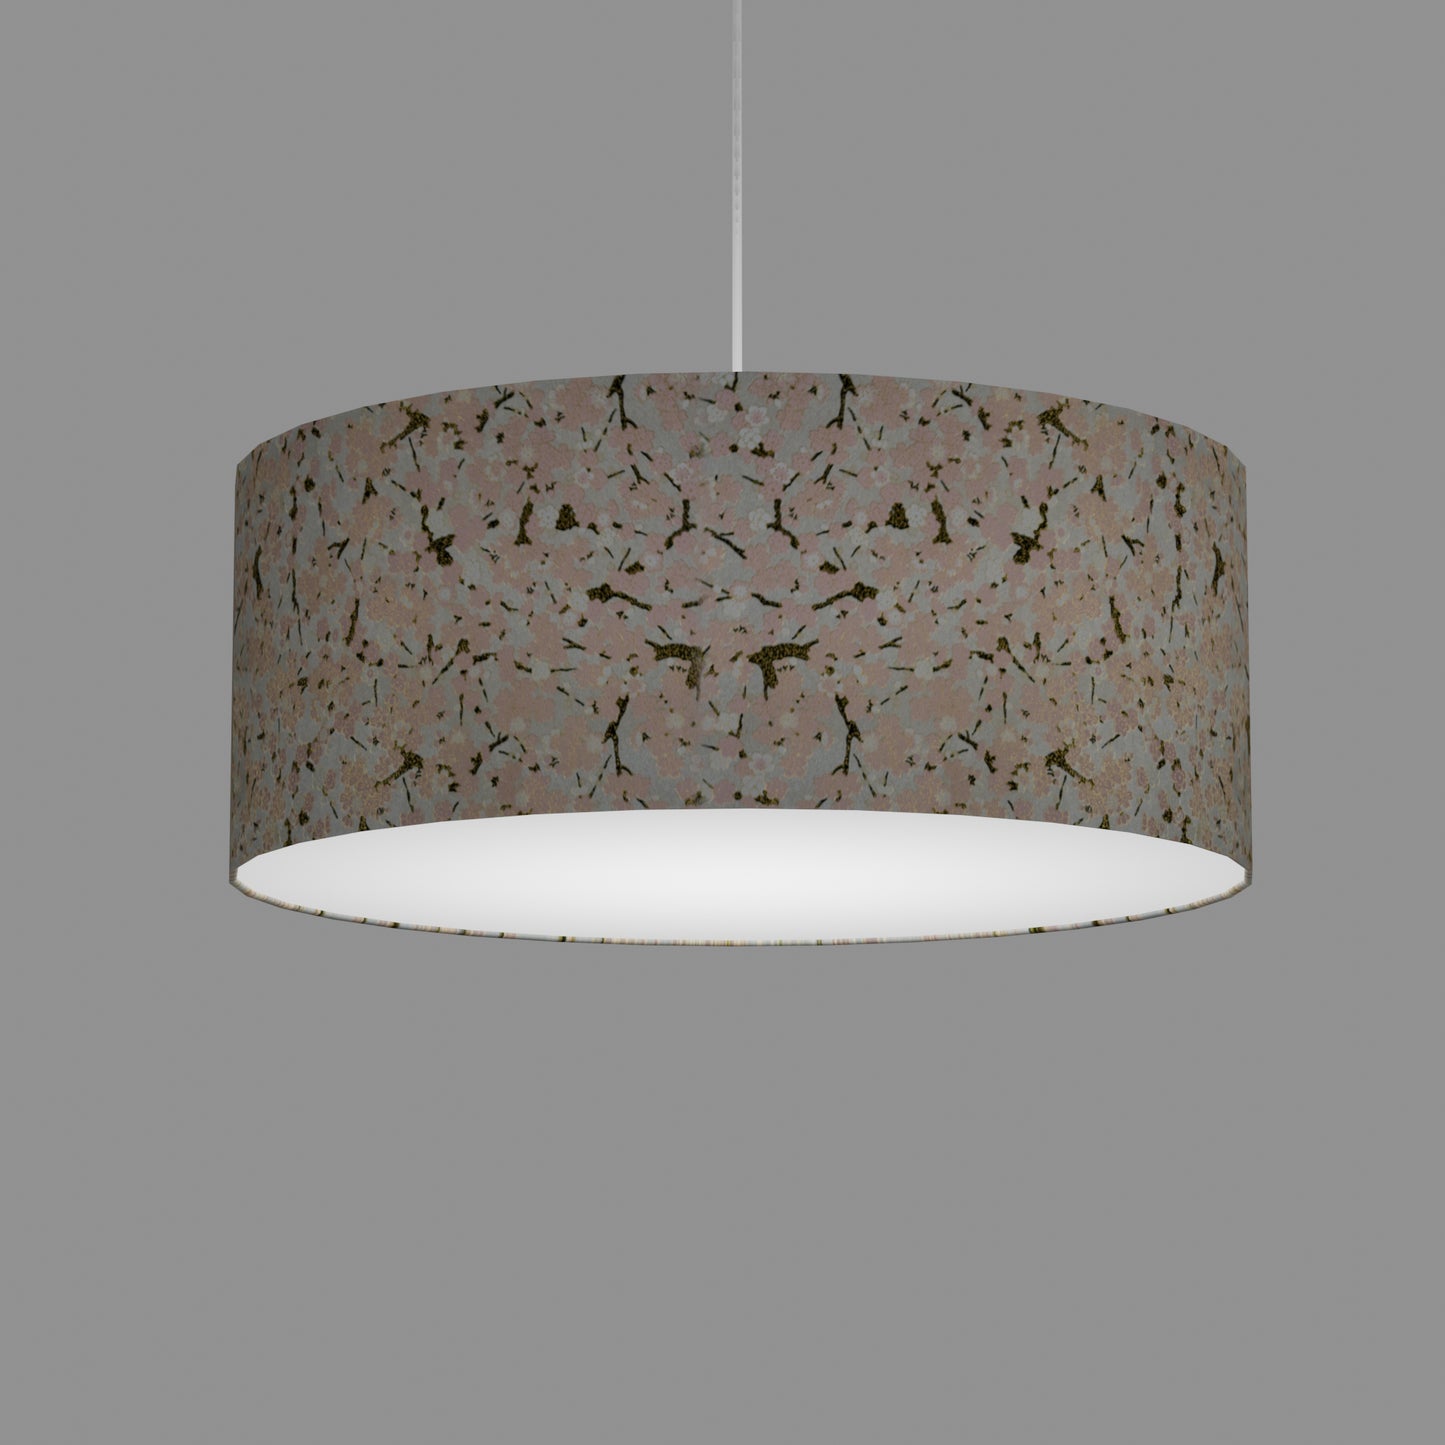 Drum Lamp Shade - W02 - Pink Cherry Blossom on Grey, 50cm(d) x 20cm(h)